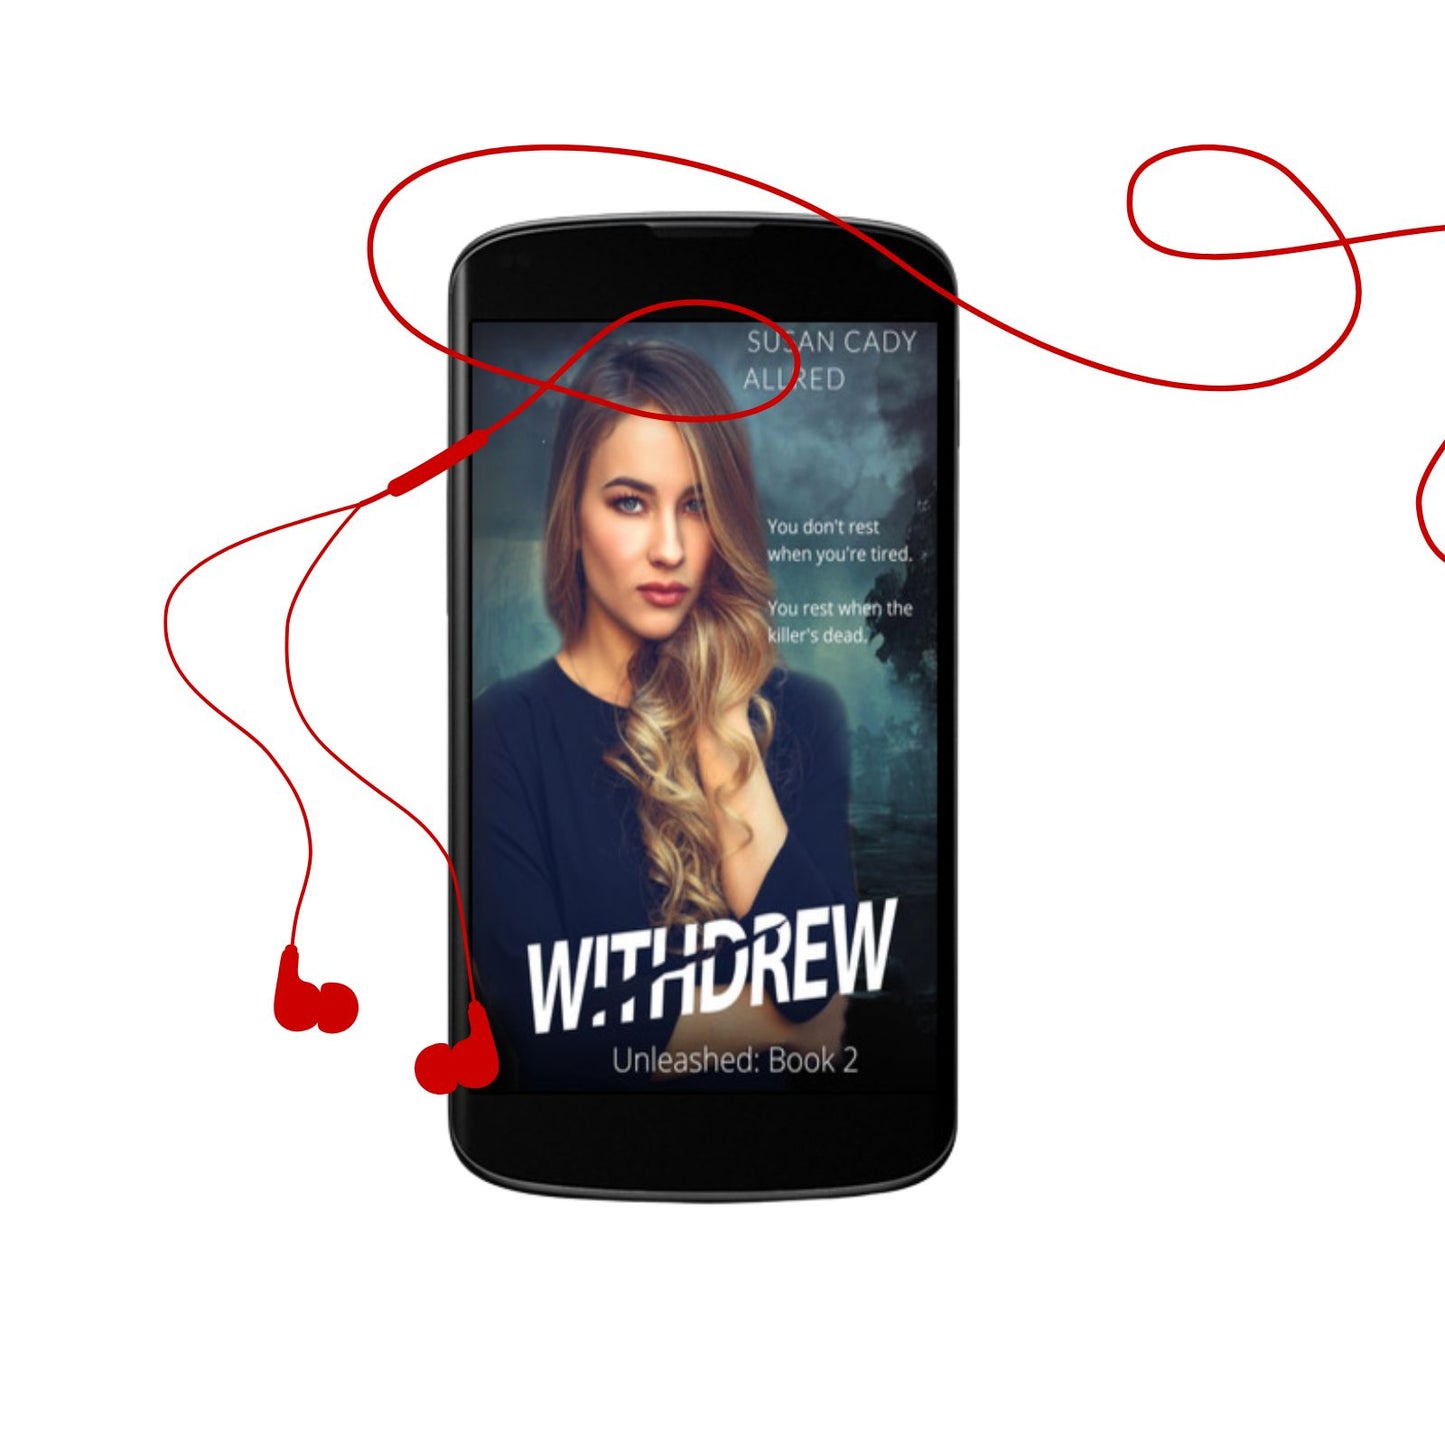 WithDrew: A YA Thriller (Unleashed Book 2)